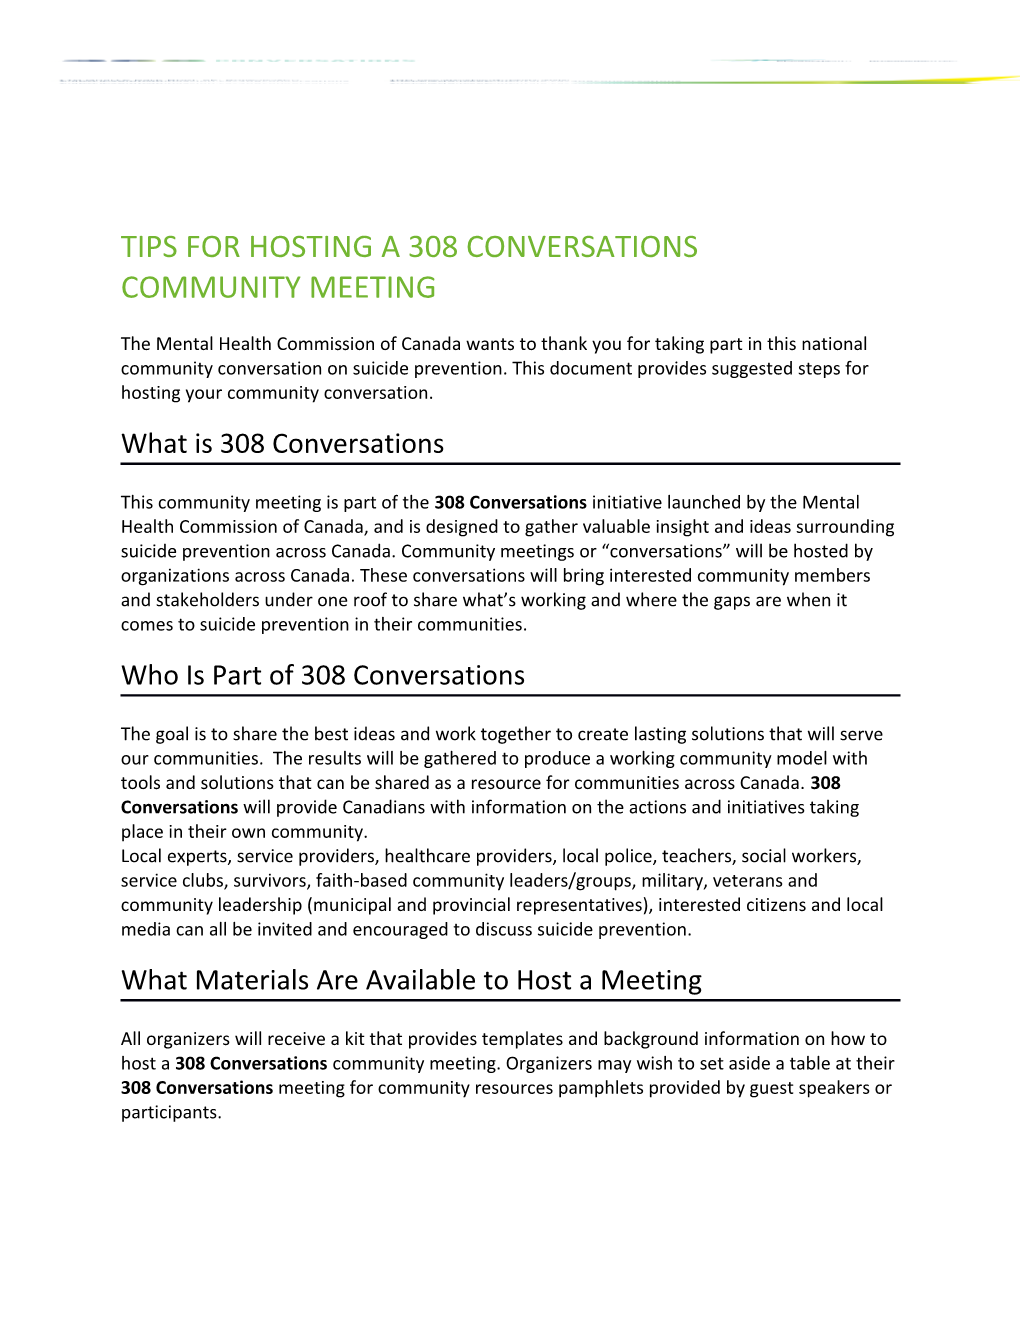 Tips for Hosting a 308 Conversations